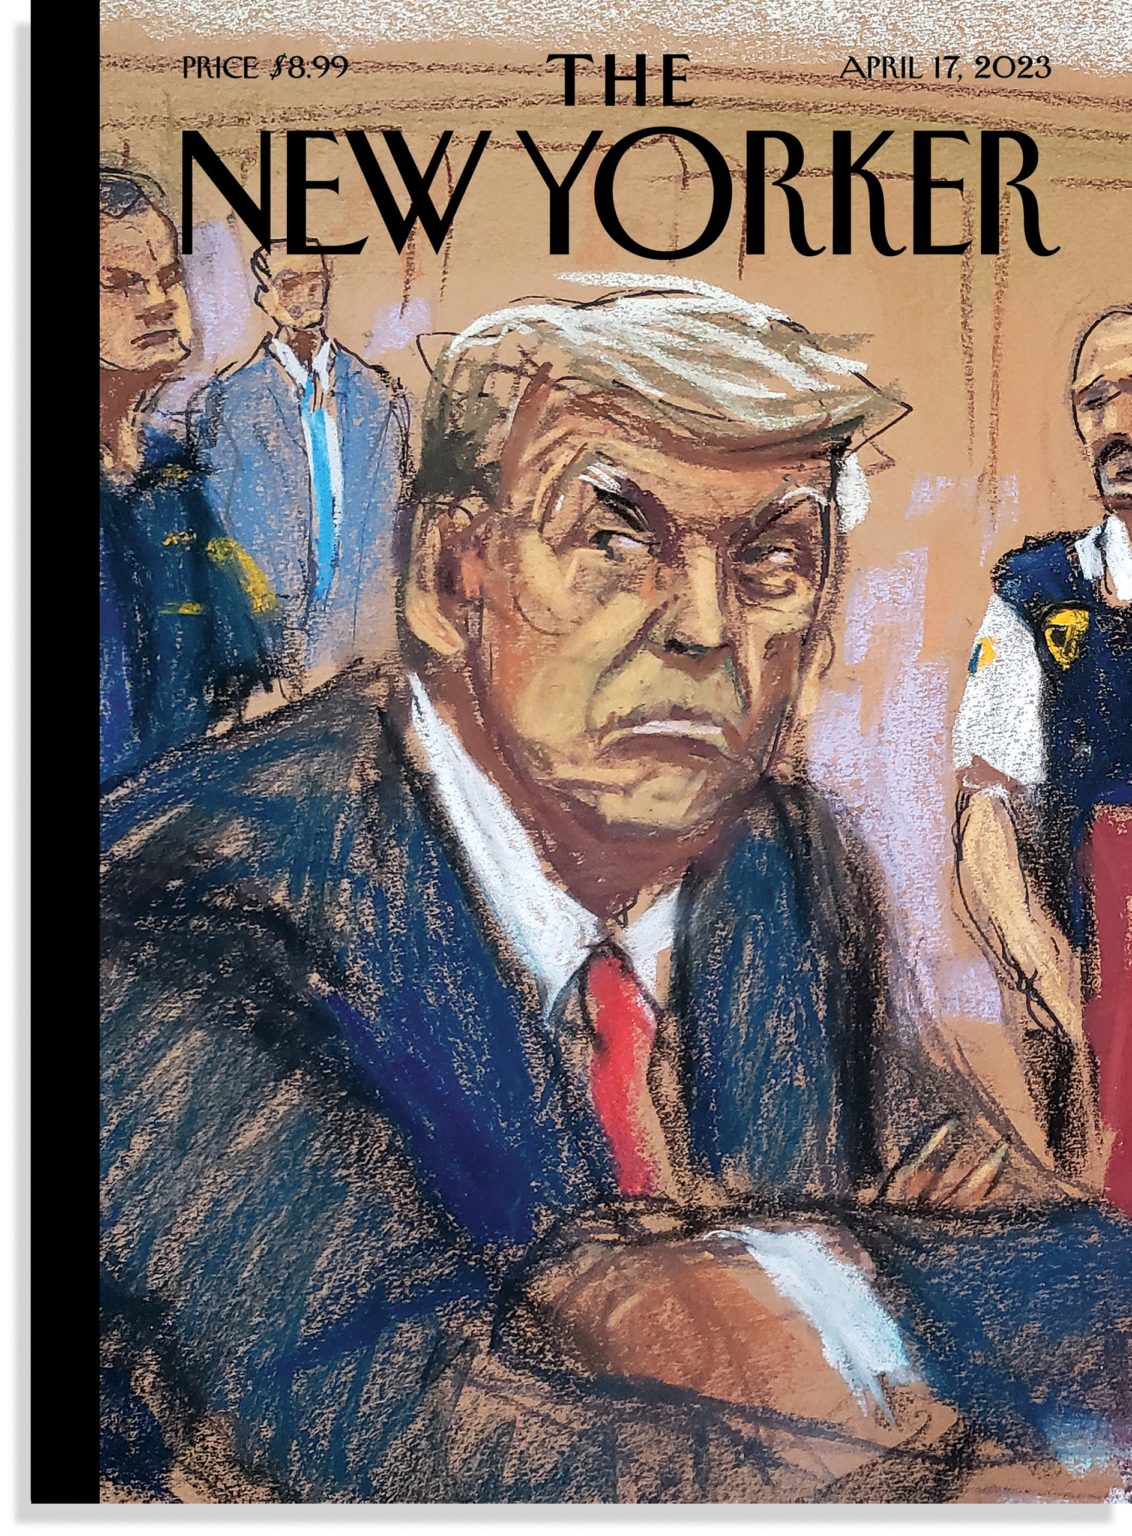 Donald Trump Makes the Cover of the New Yorker in a First Time Ever